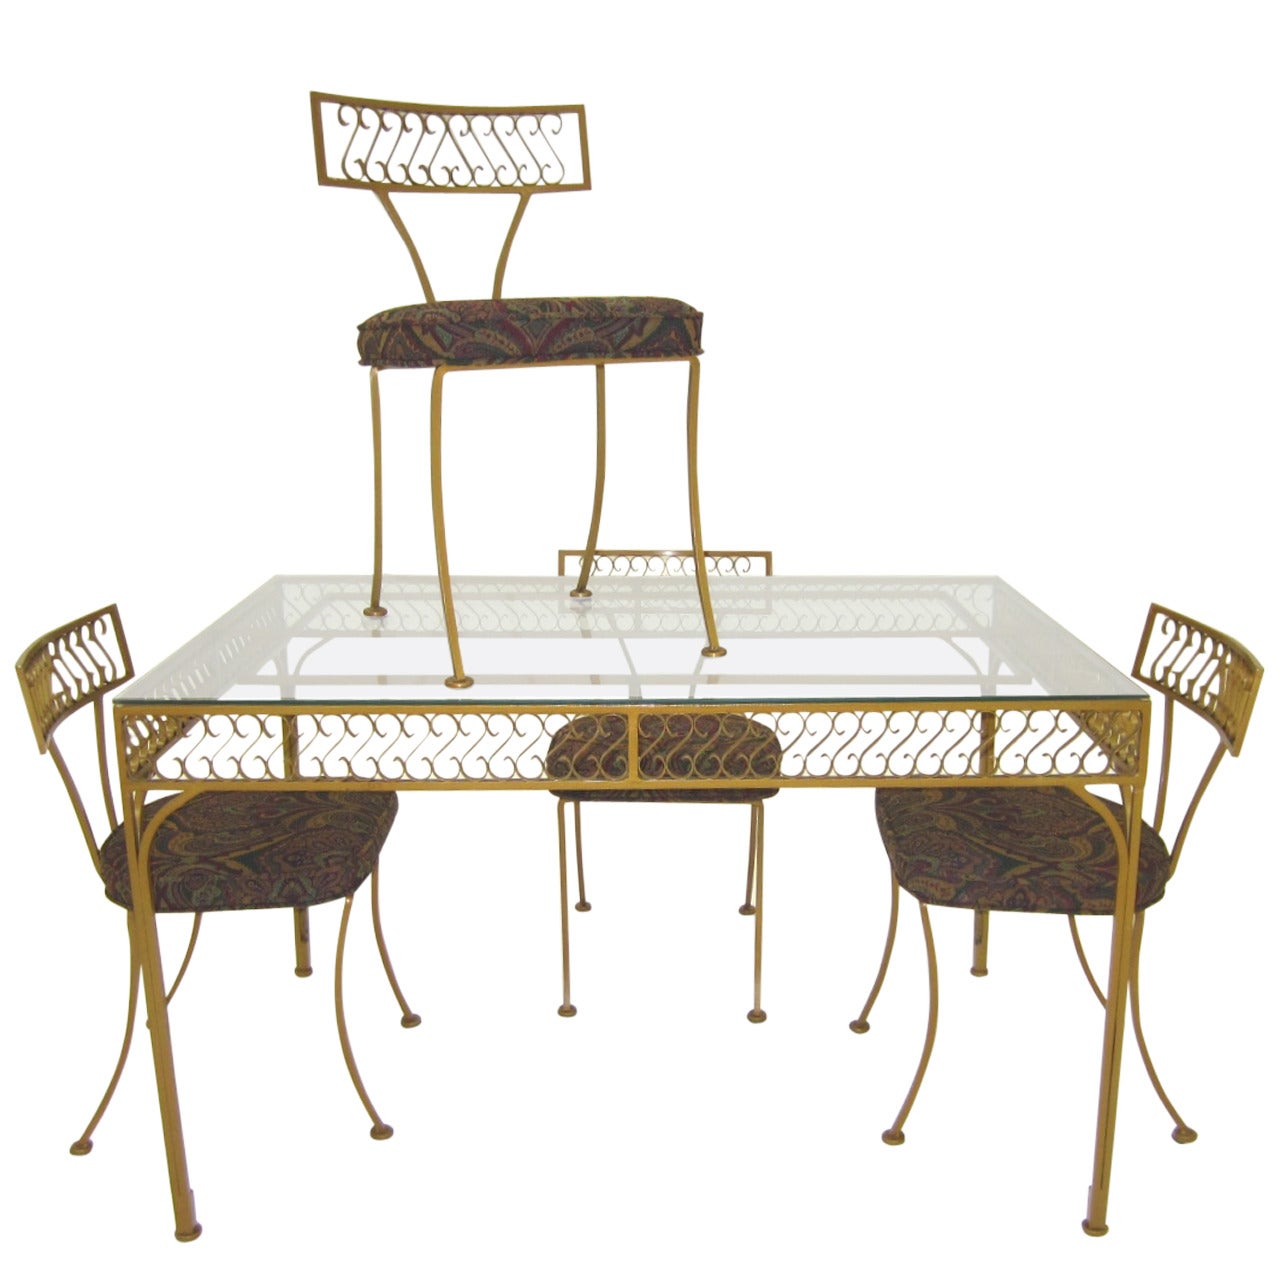 1960s William "Billy" Haines Klismos Iron Table and Chairs by Thinline